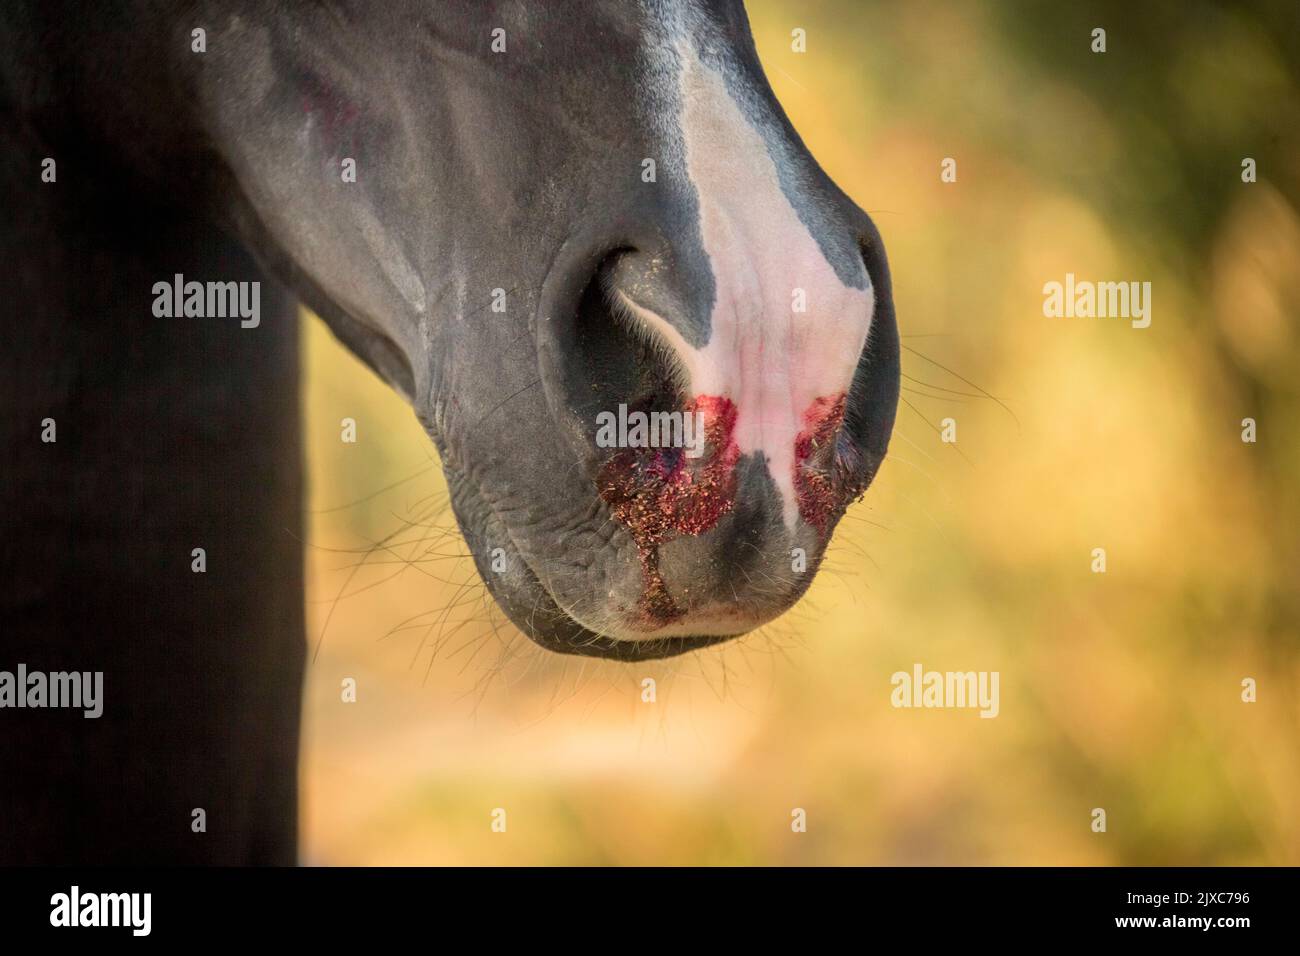 A horse with nosebleed Stock Photo